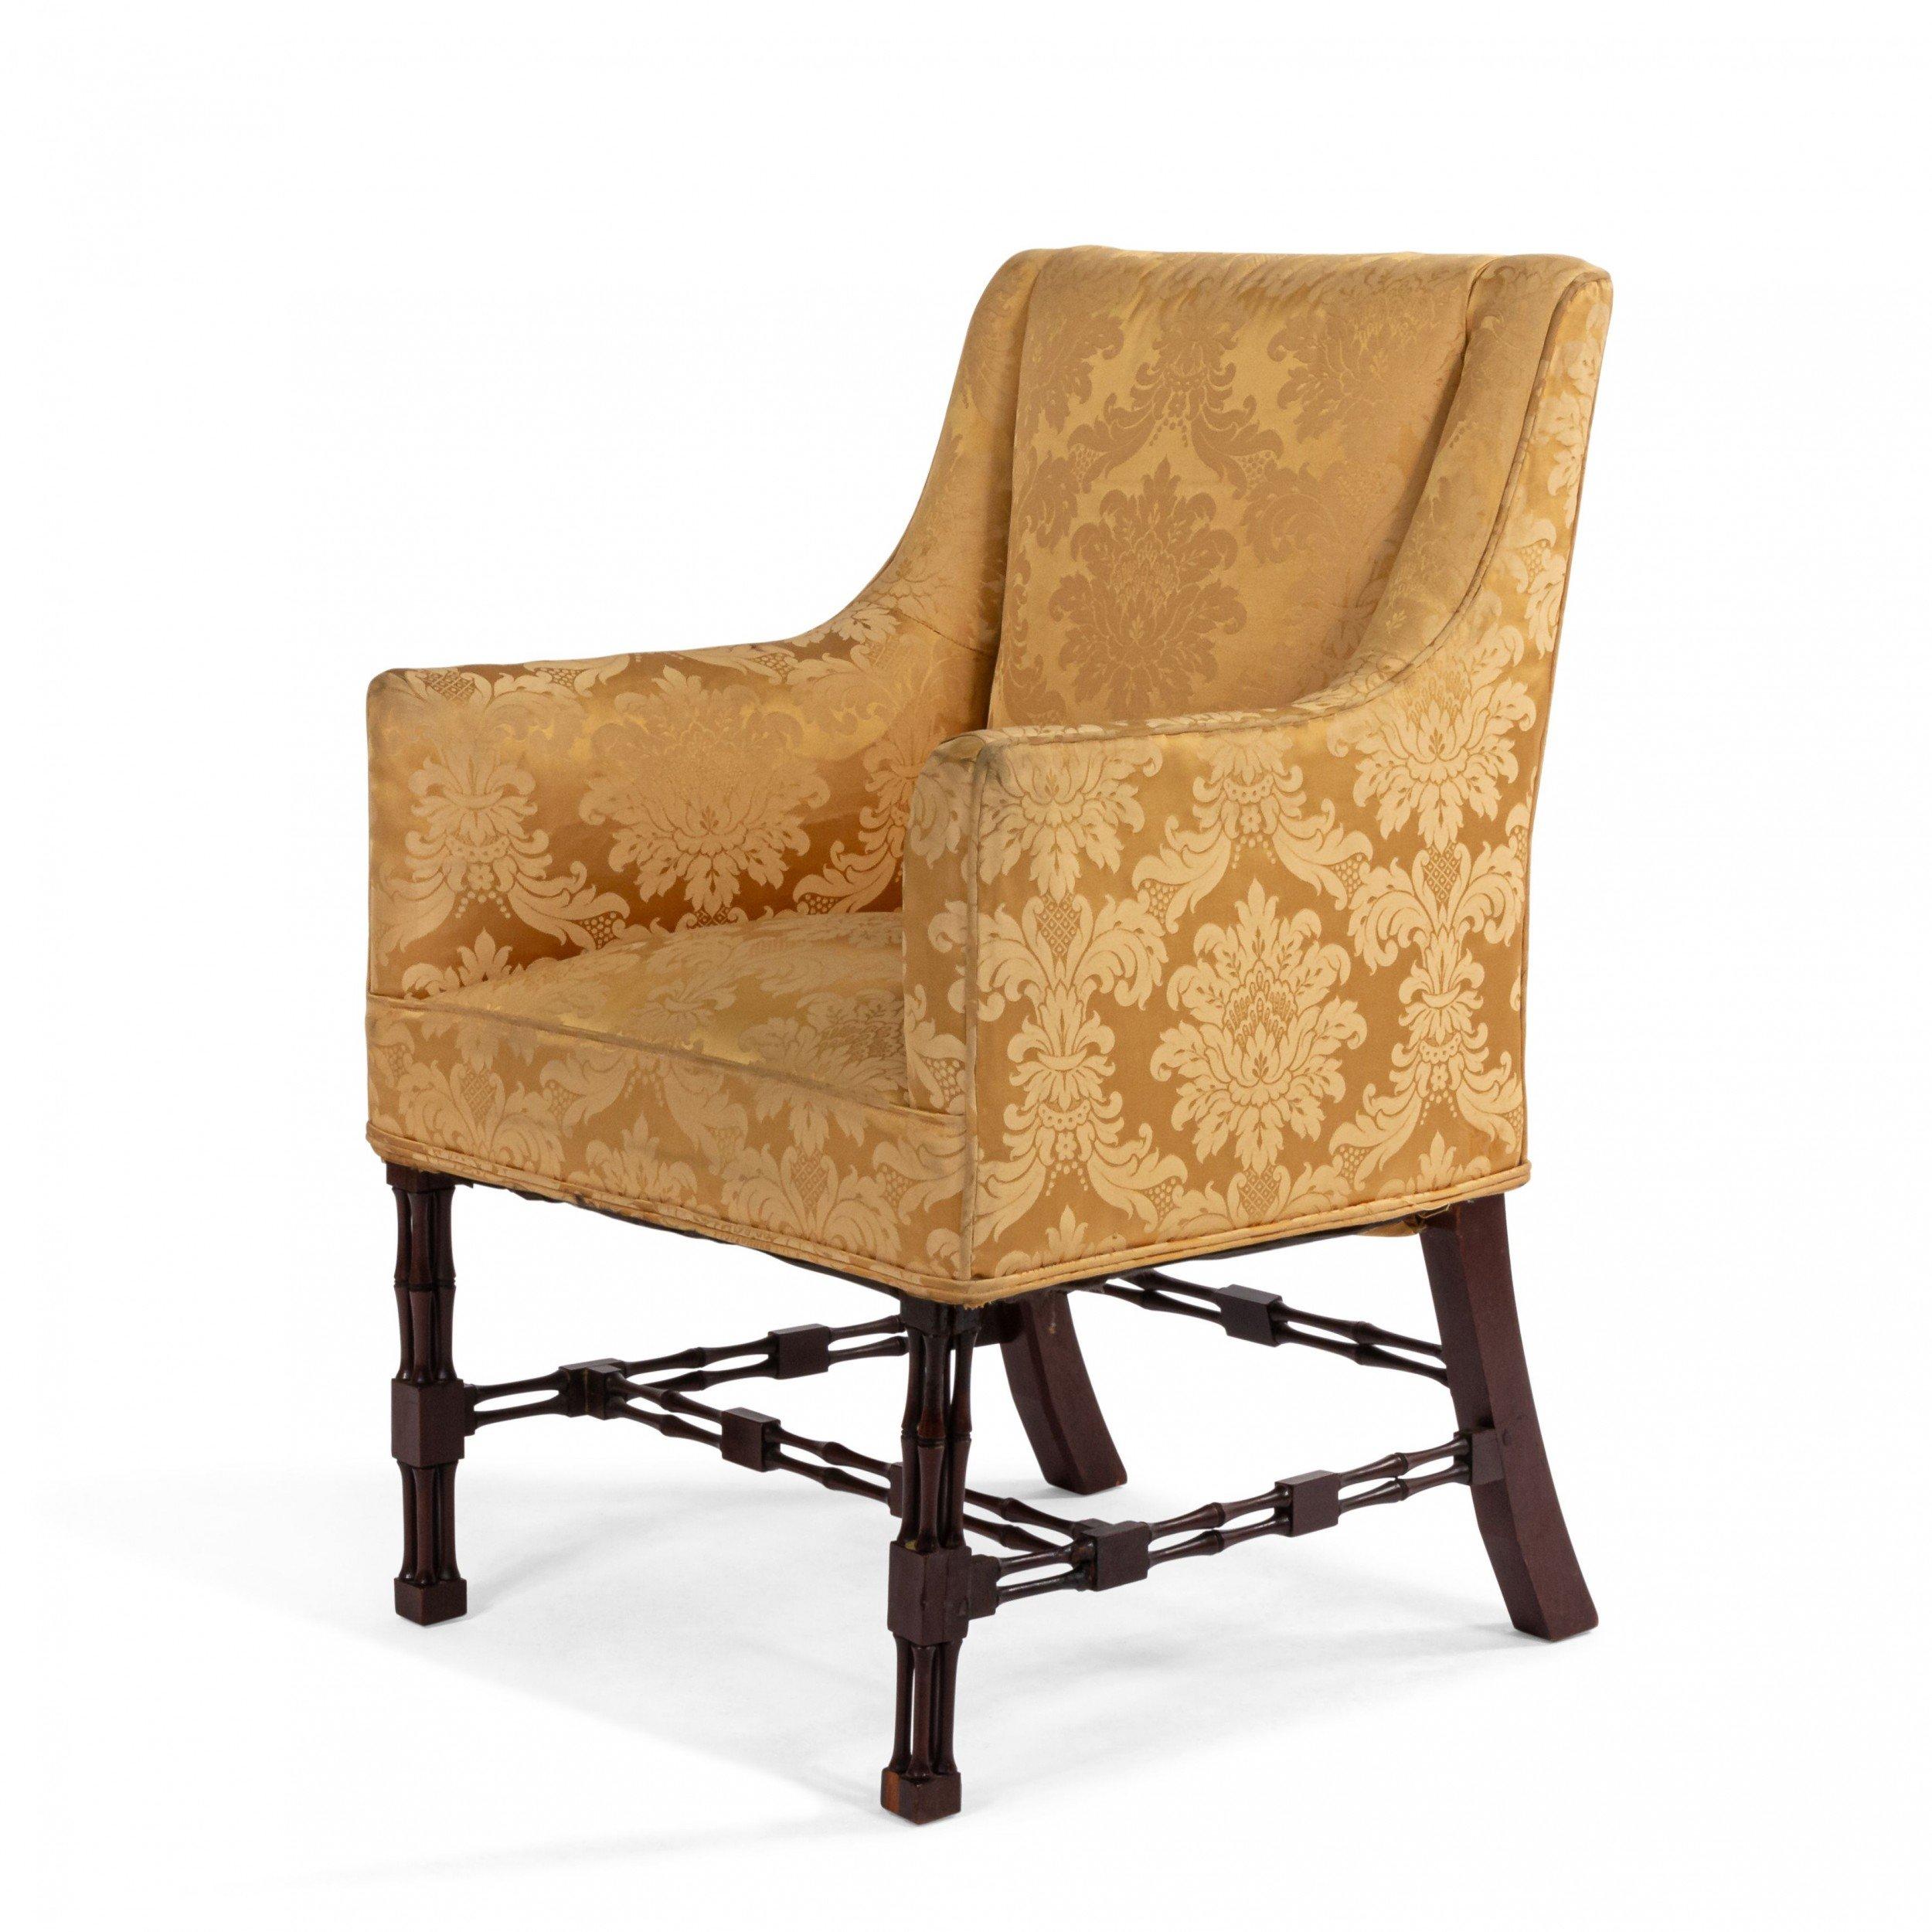 English Chinese Chippendale Bergere Arm Chairs For Sale